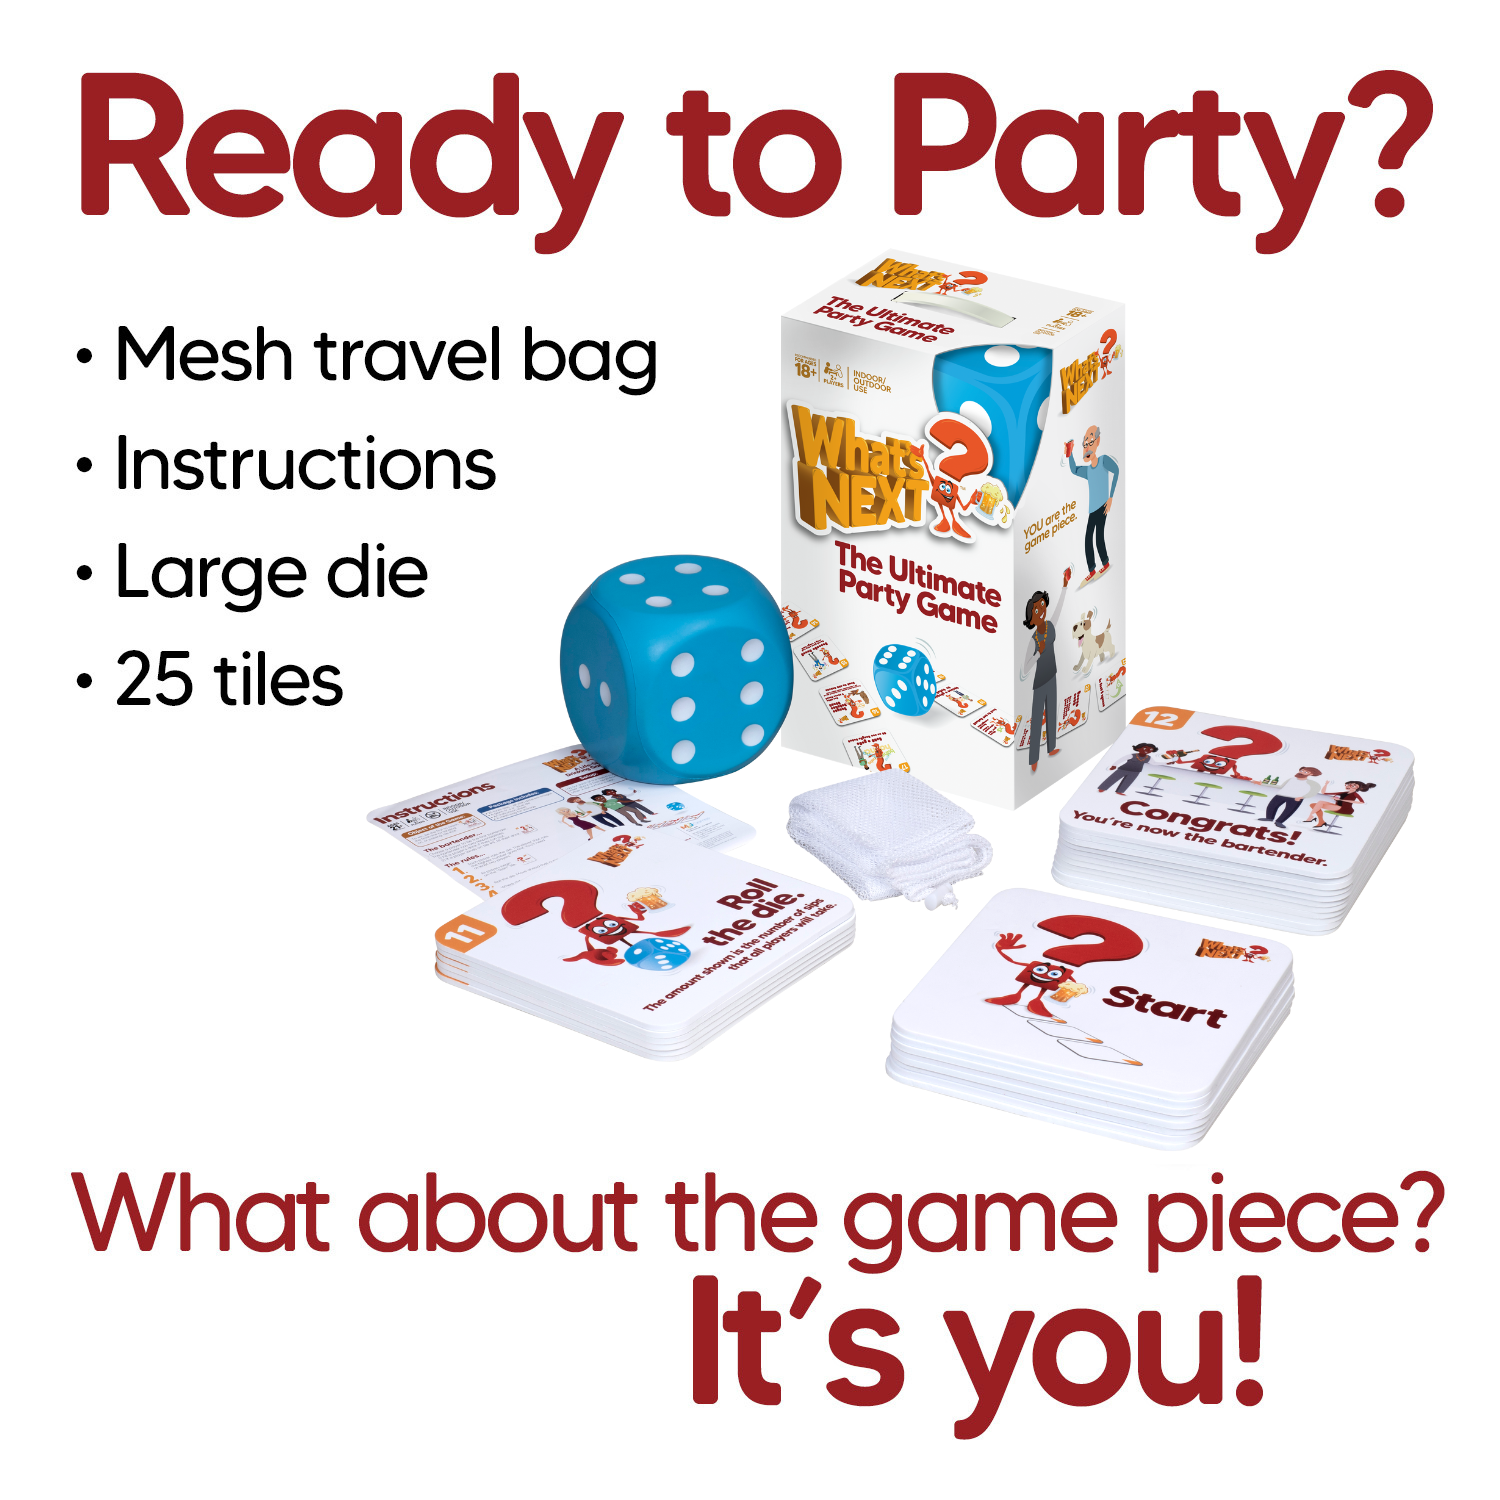 What's Next? The Ultimate Party Game - M&J Games, LLC